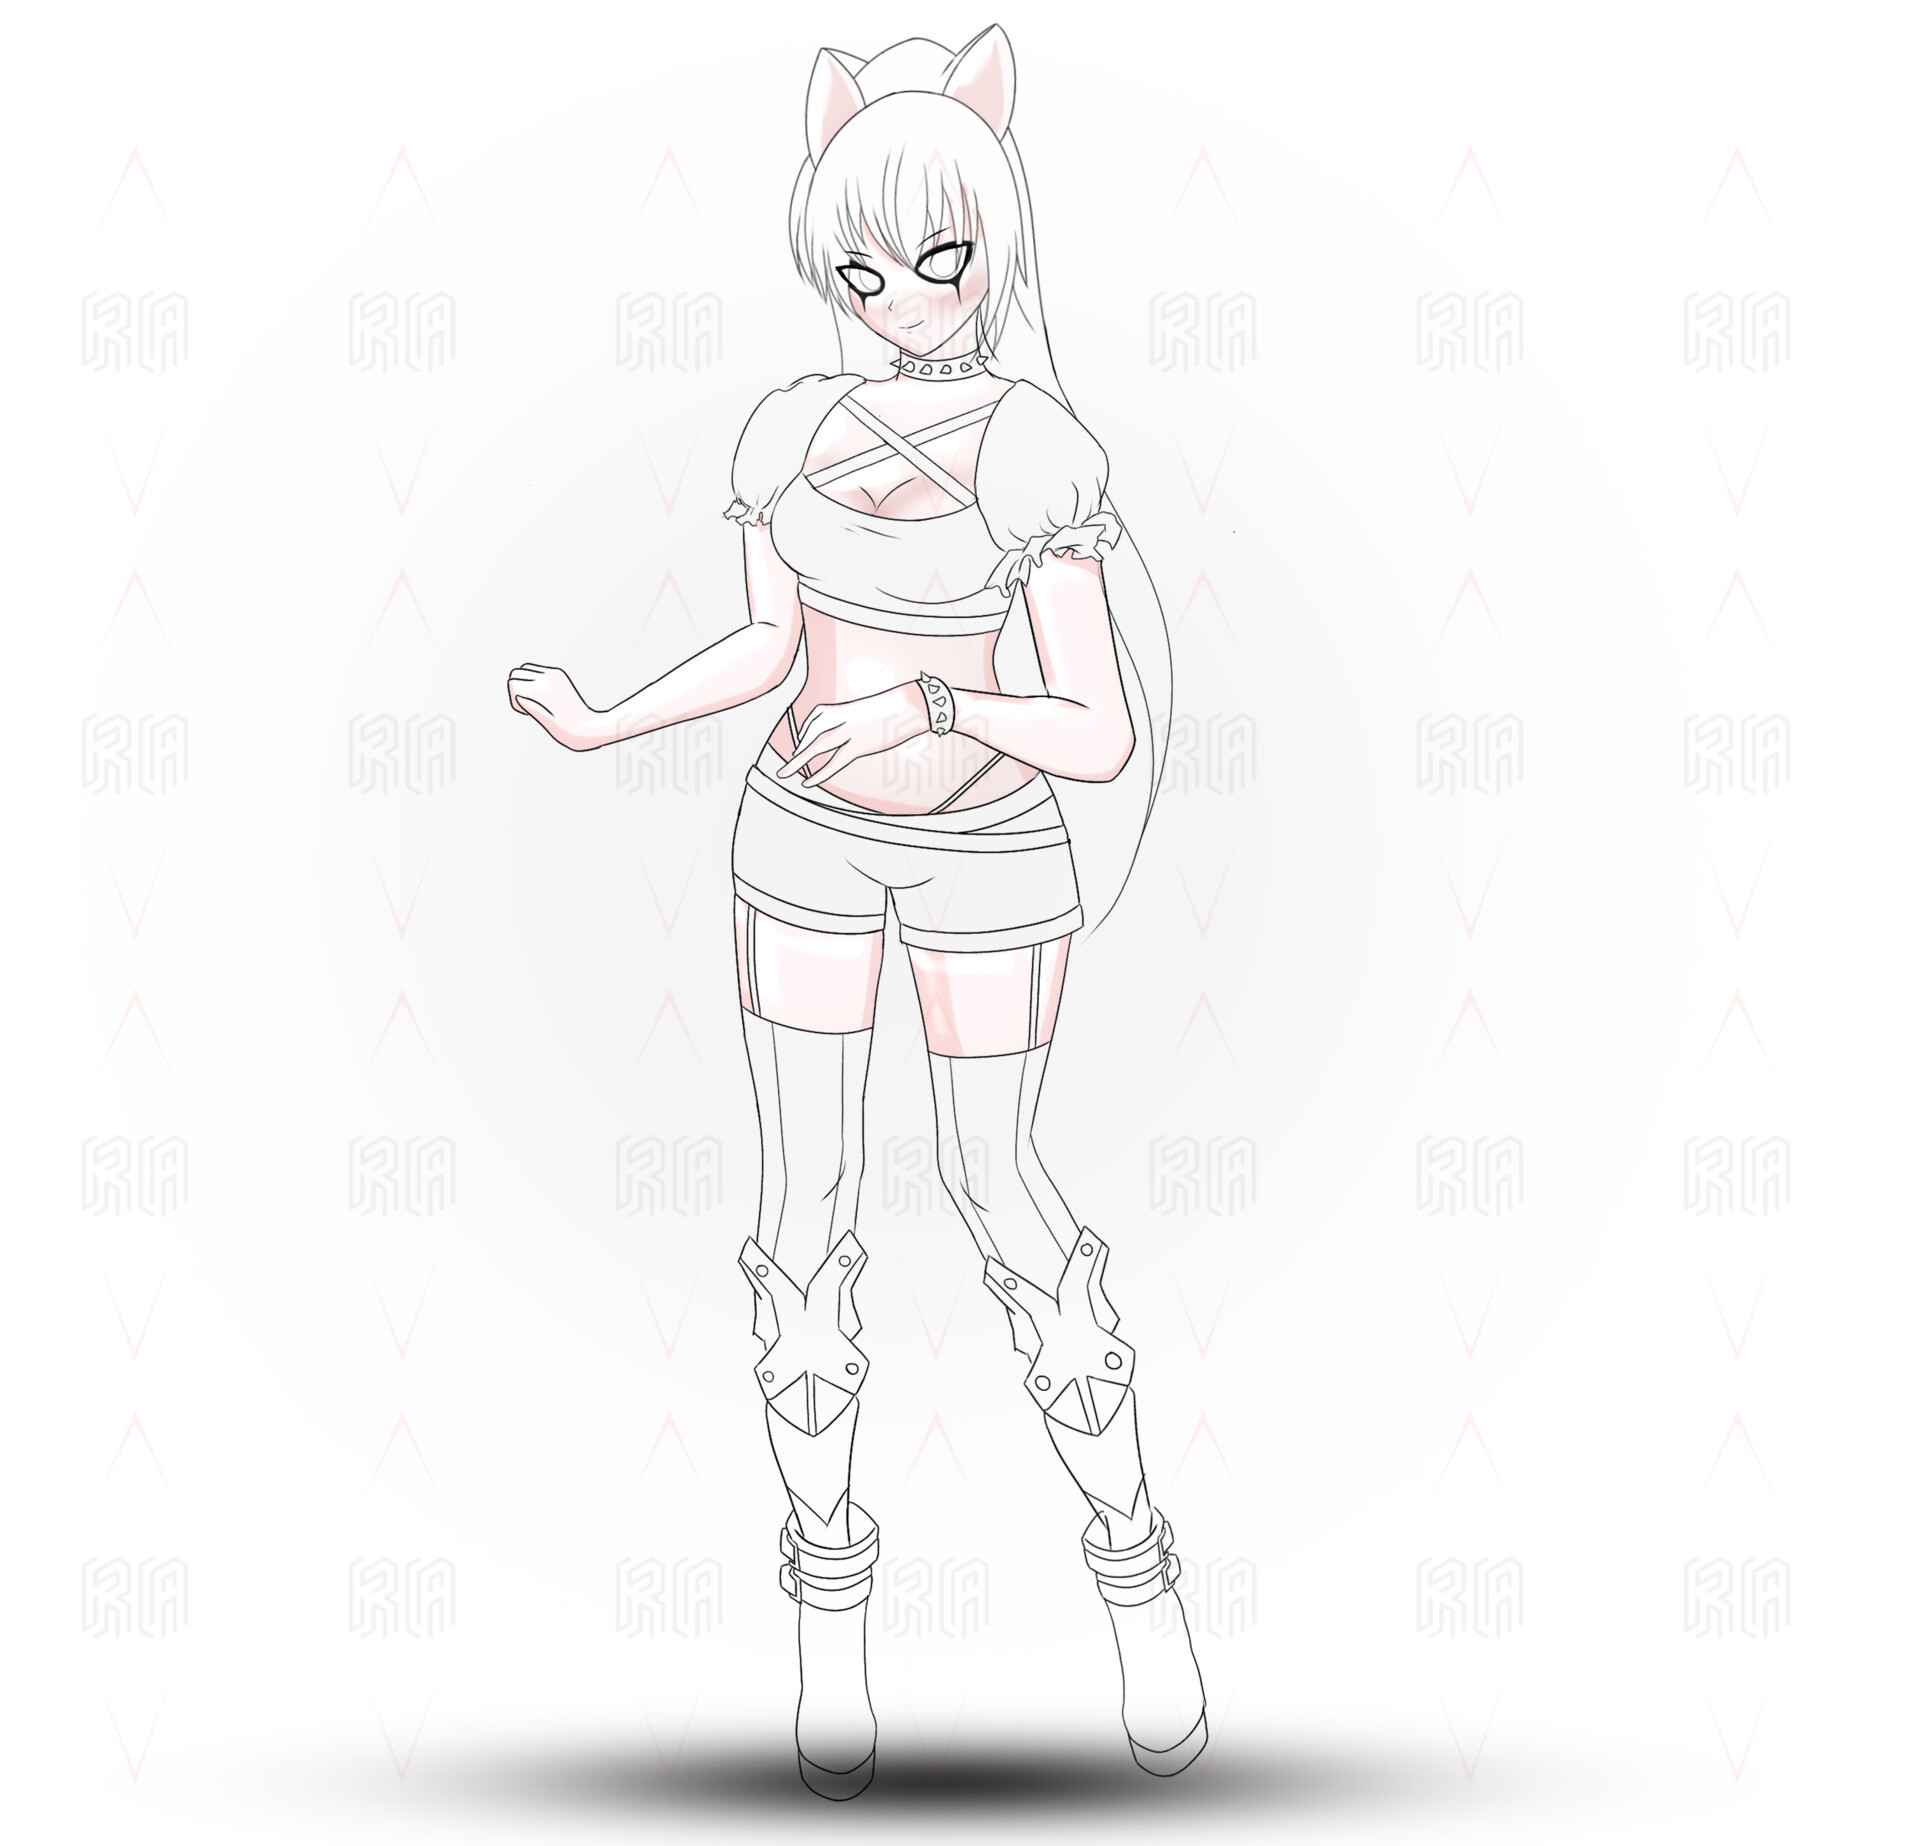 Custom Full body drawing of your OC or a Video Game/anime